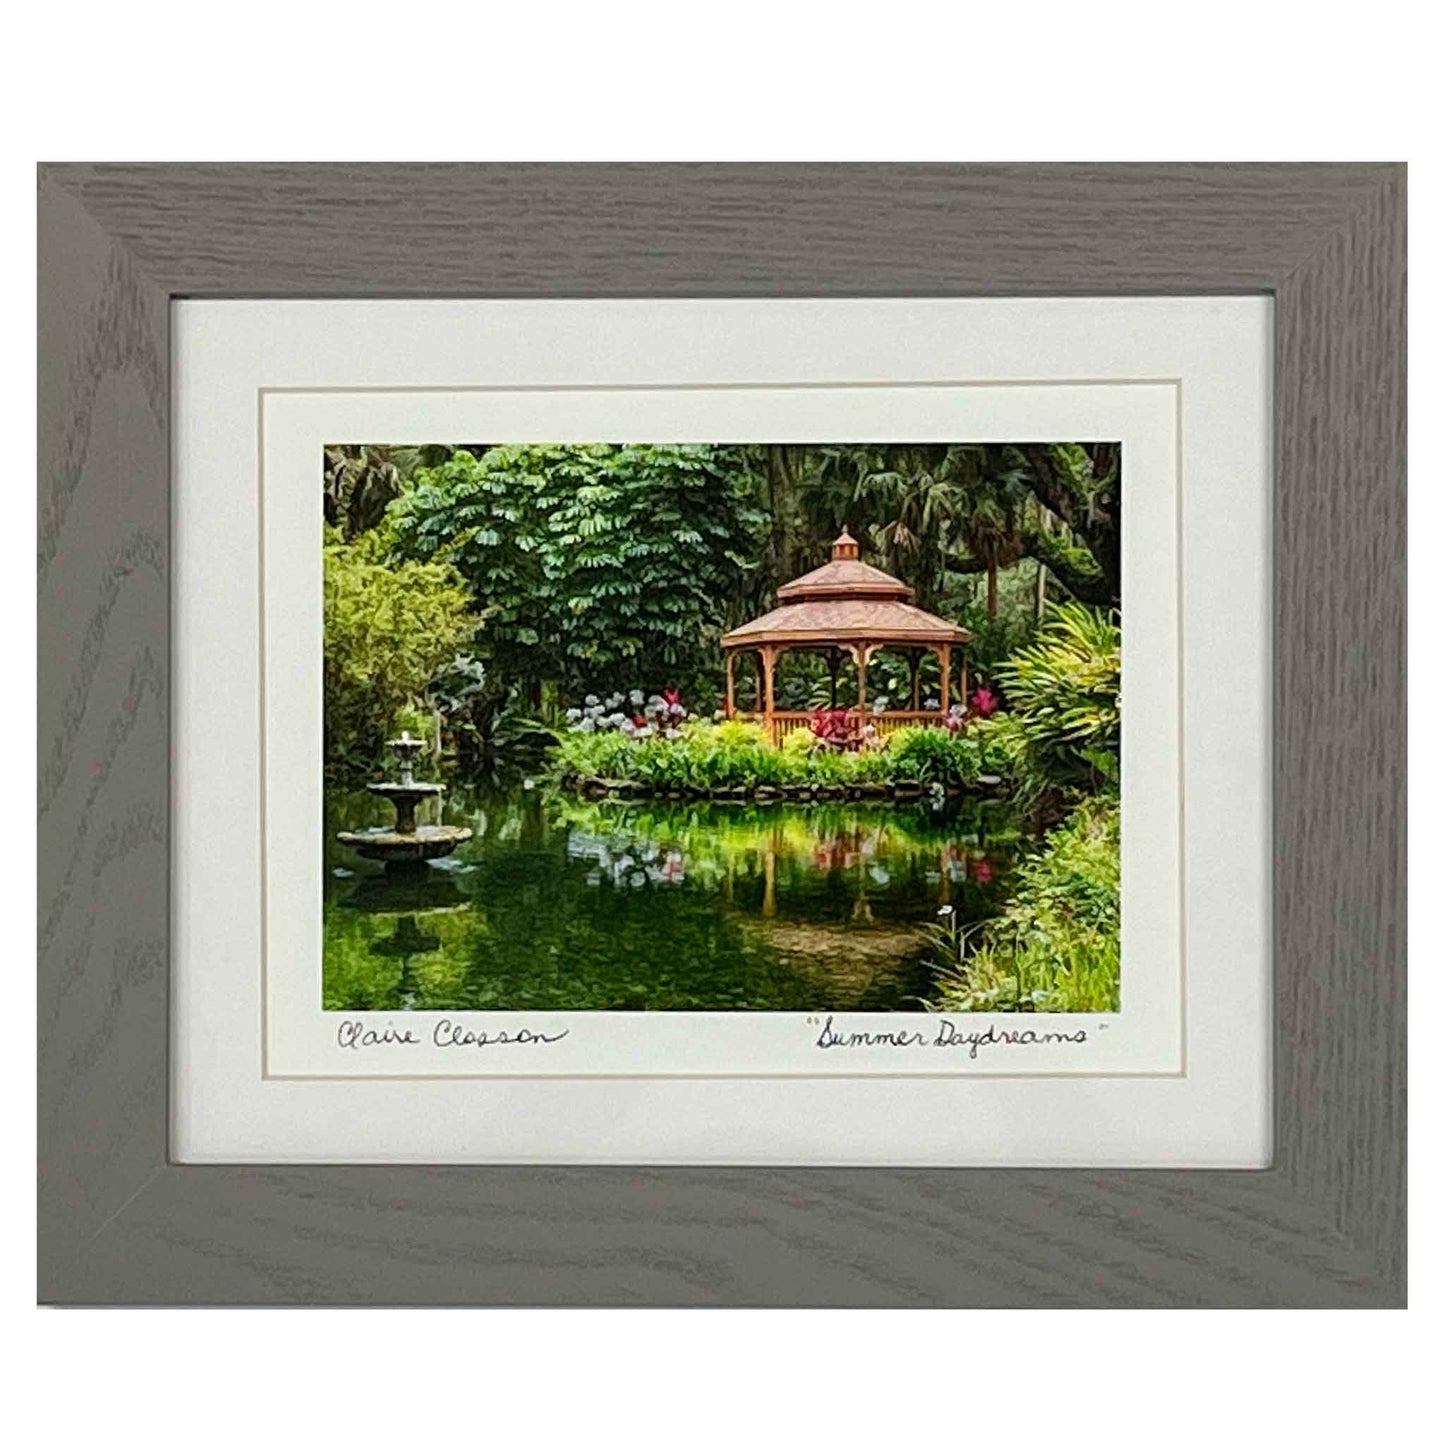 ECC “Summer Daydreams” Framed Print by Photographer Claire Closson. Stunning photograph of a gazebo on the water surrounded by flowers and lush green. A tiered fountain cascades water. Soft reflections in the water. A 5 x 7 print framed to 8 x 10 inches under glass. Matted in white with a gray wooden frame.